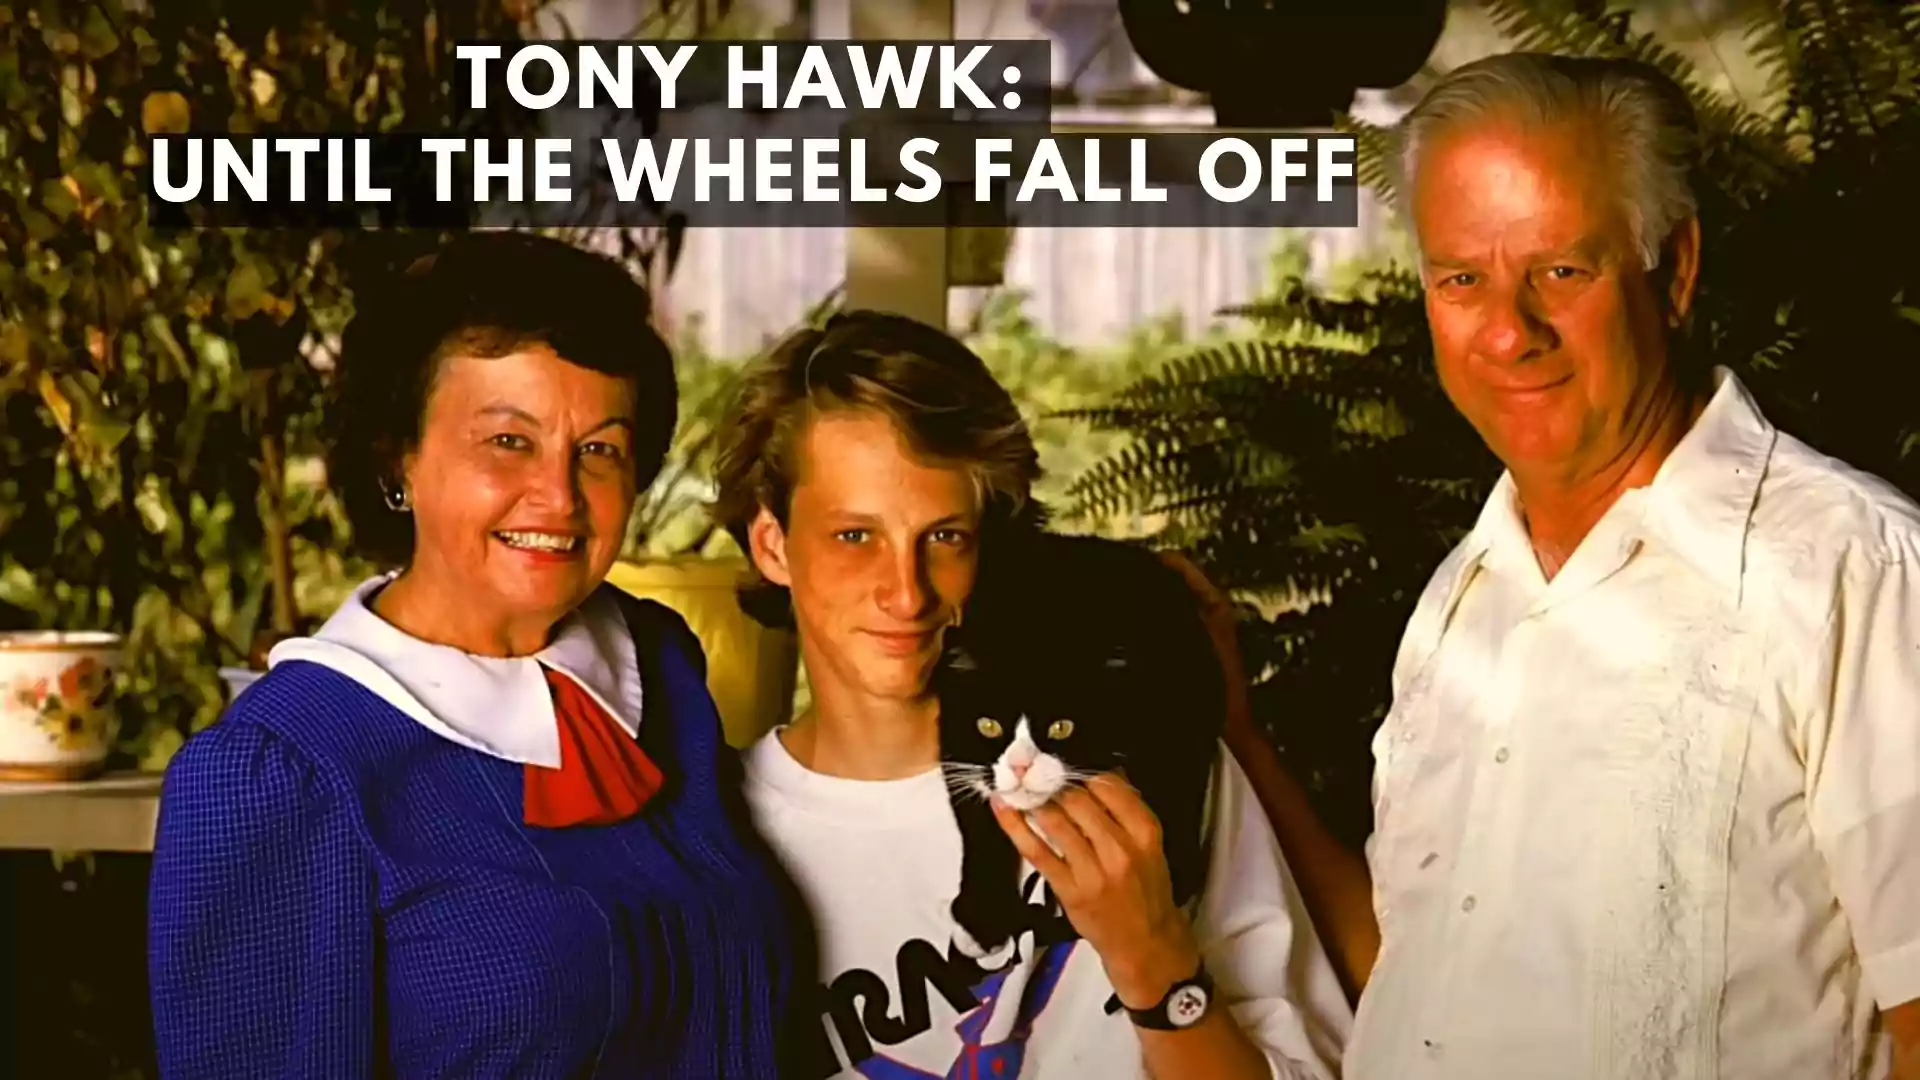 Tony Hawk Until the Wheels Fall Off Wallpaper and Image